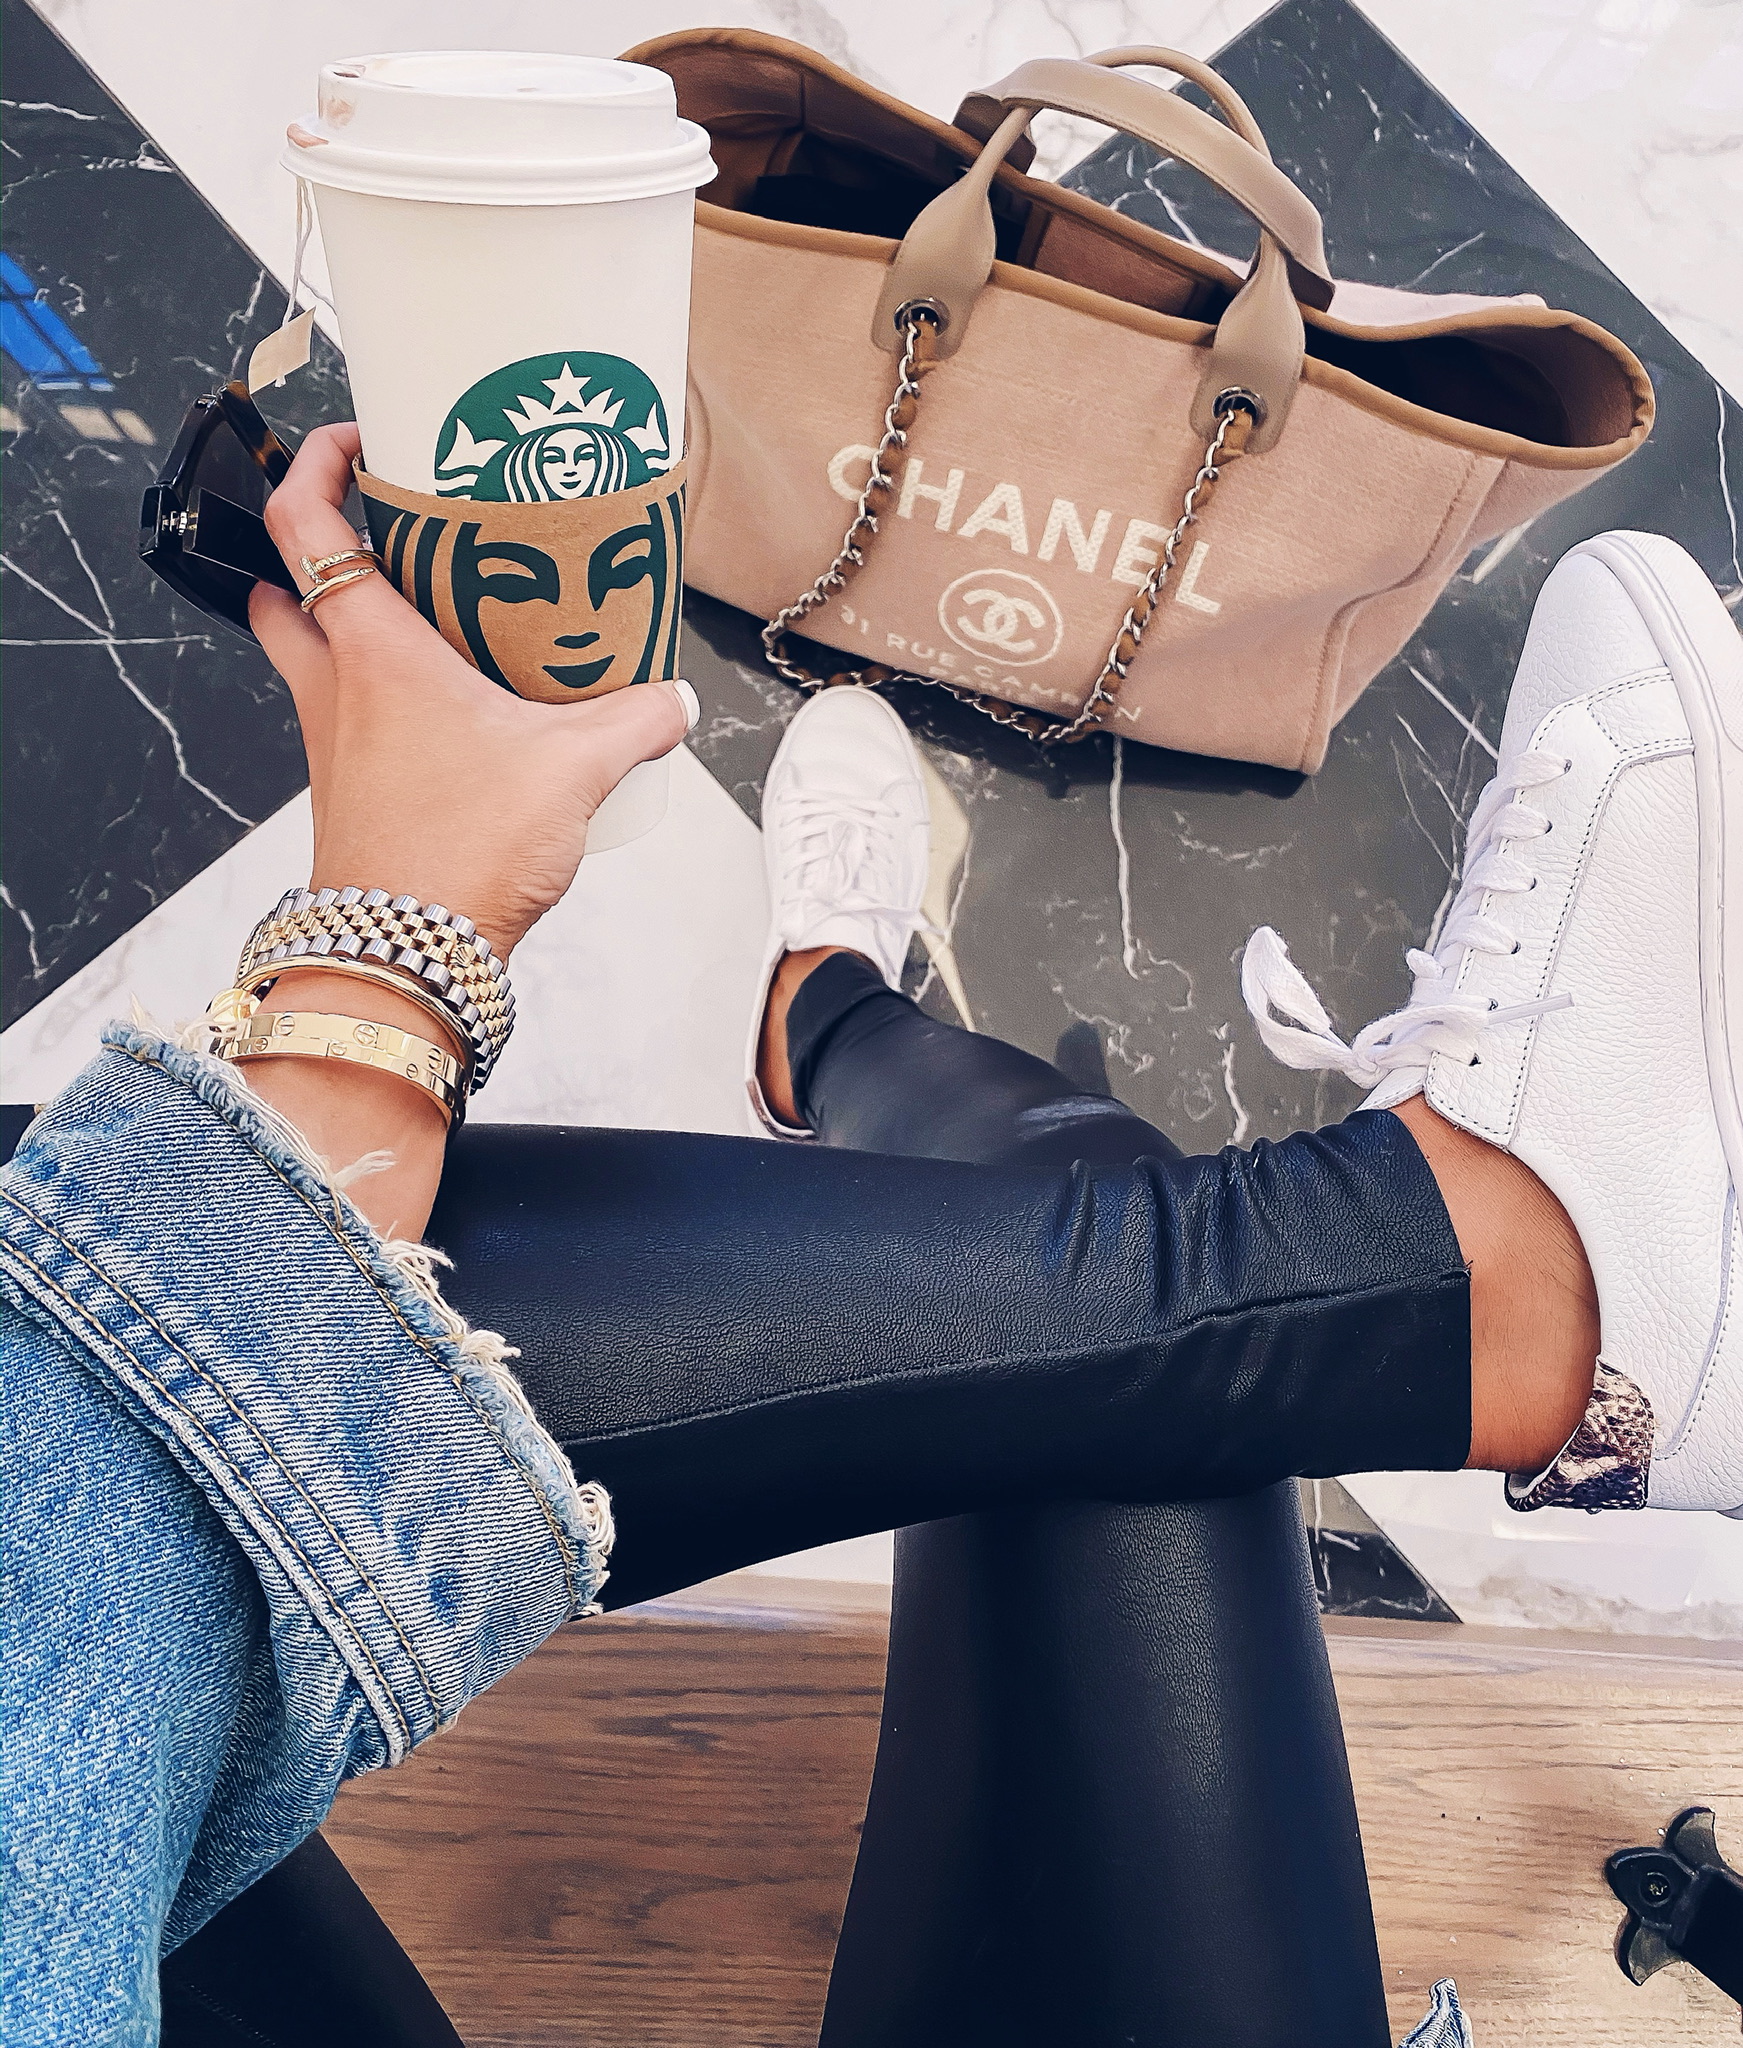 Instagram Recap by popular US fashion blog, The Sweetest Thing: image of a woman wearing a Rolex watch, Steve Madden GLOVE NATURAL SNAKE, Nordstrom Faux Leather Control Ankle Leggings COMMANDO, and Nordstrom 55mm Cat Eye Sunglasses GUCCI.